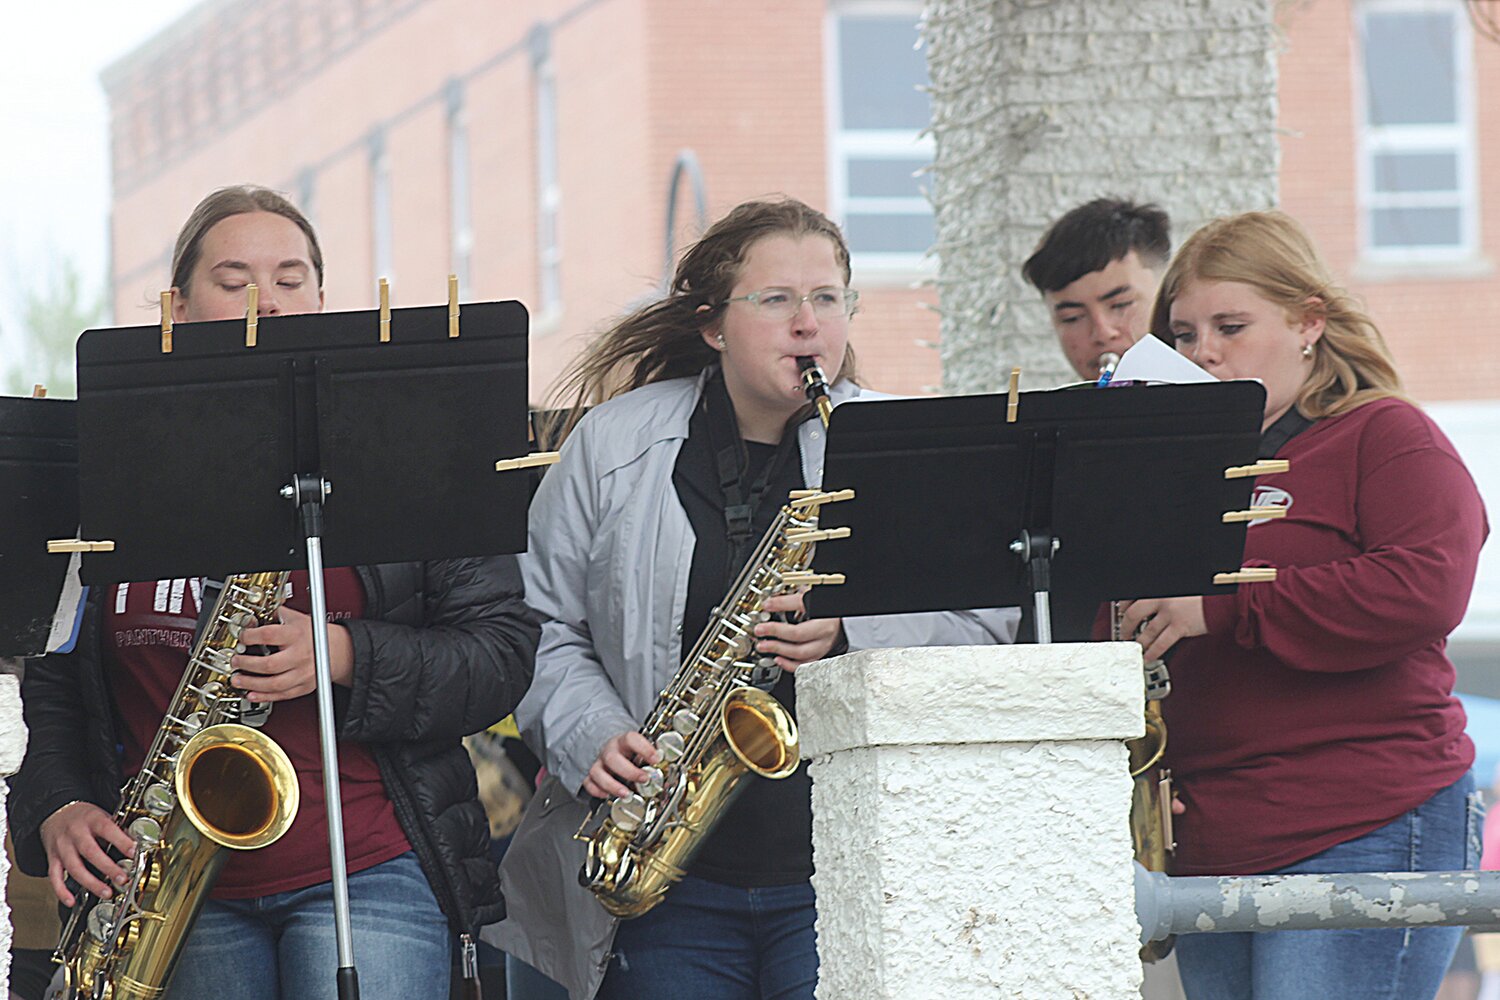 The Mountain Grove Jazz Band performs on the bandstand during Mayfest at the square in Mountain Grove.